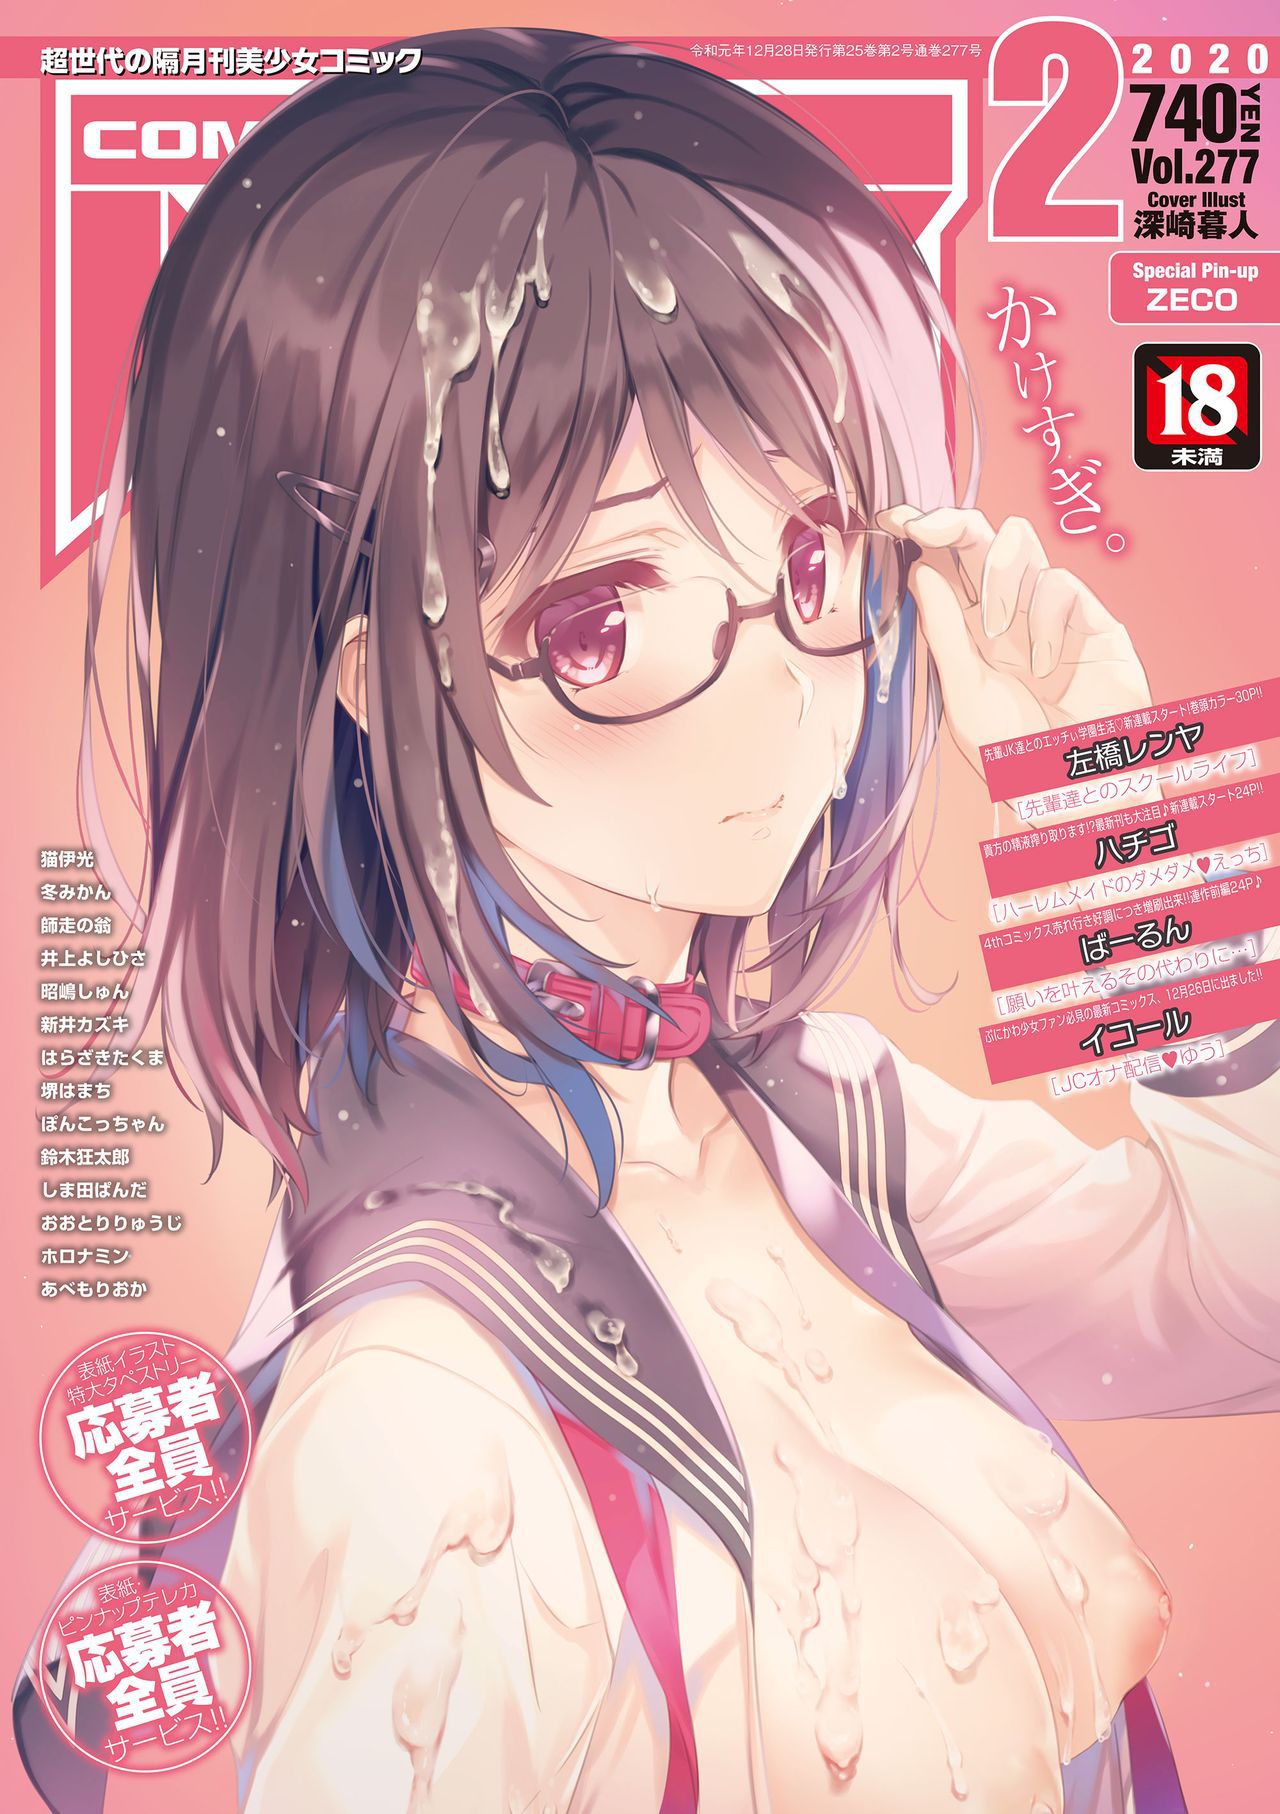 Cover pages of Comic Aun illustrated by Misaki Kurehito (2009-08 to 2021-12) 134